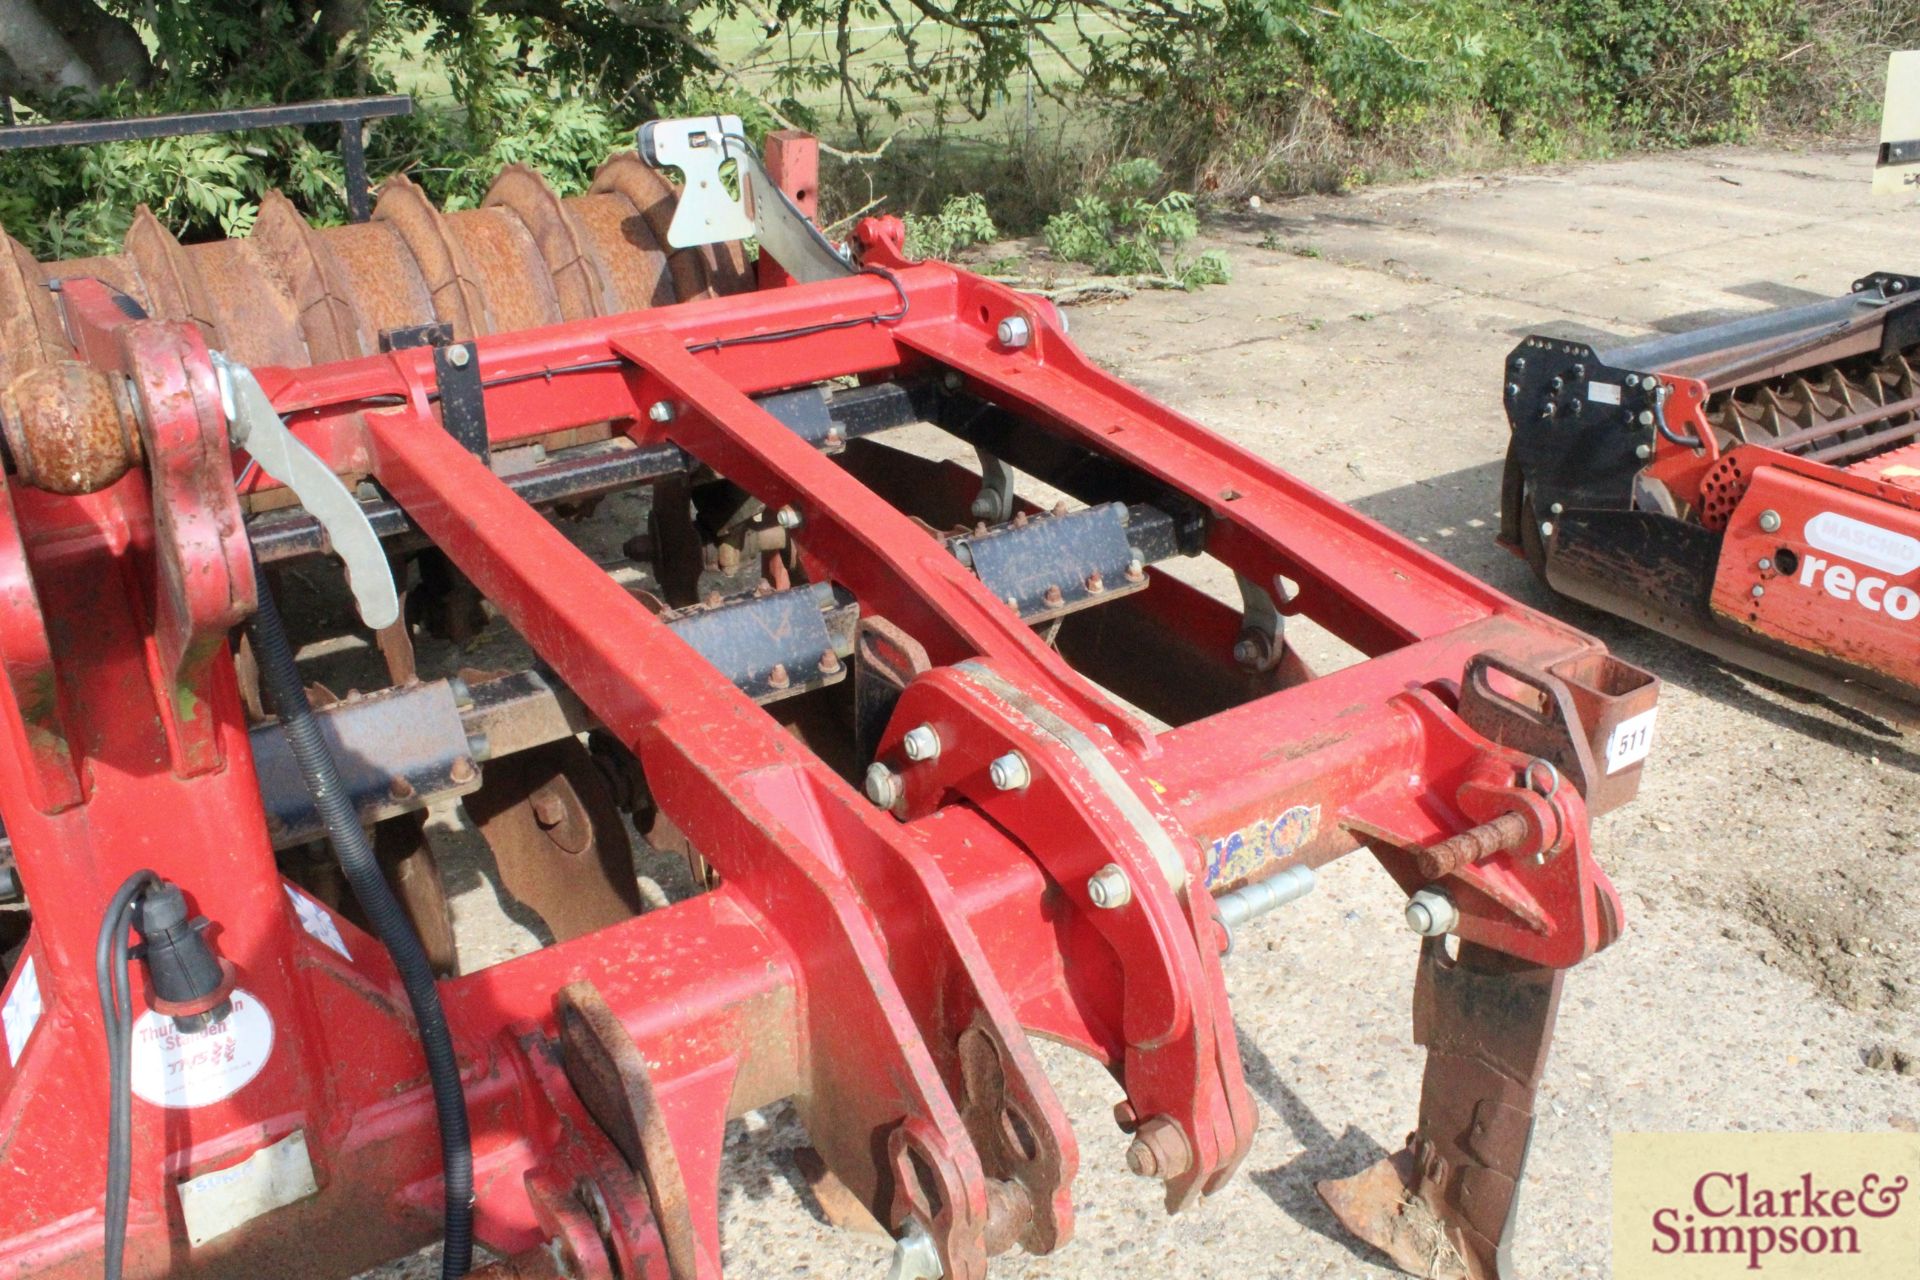 Sumo Trio 3 3m mounted cultivator 2012. Serial number 11626. With six Metcalfe low disturbance legs, - Image 8 of 21